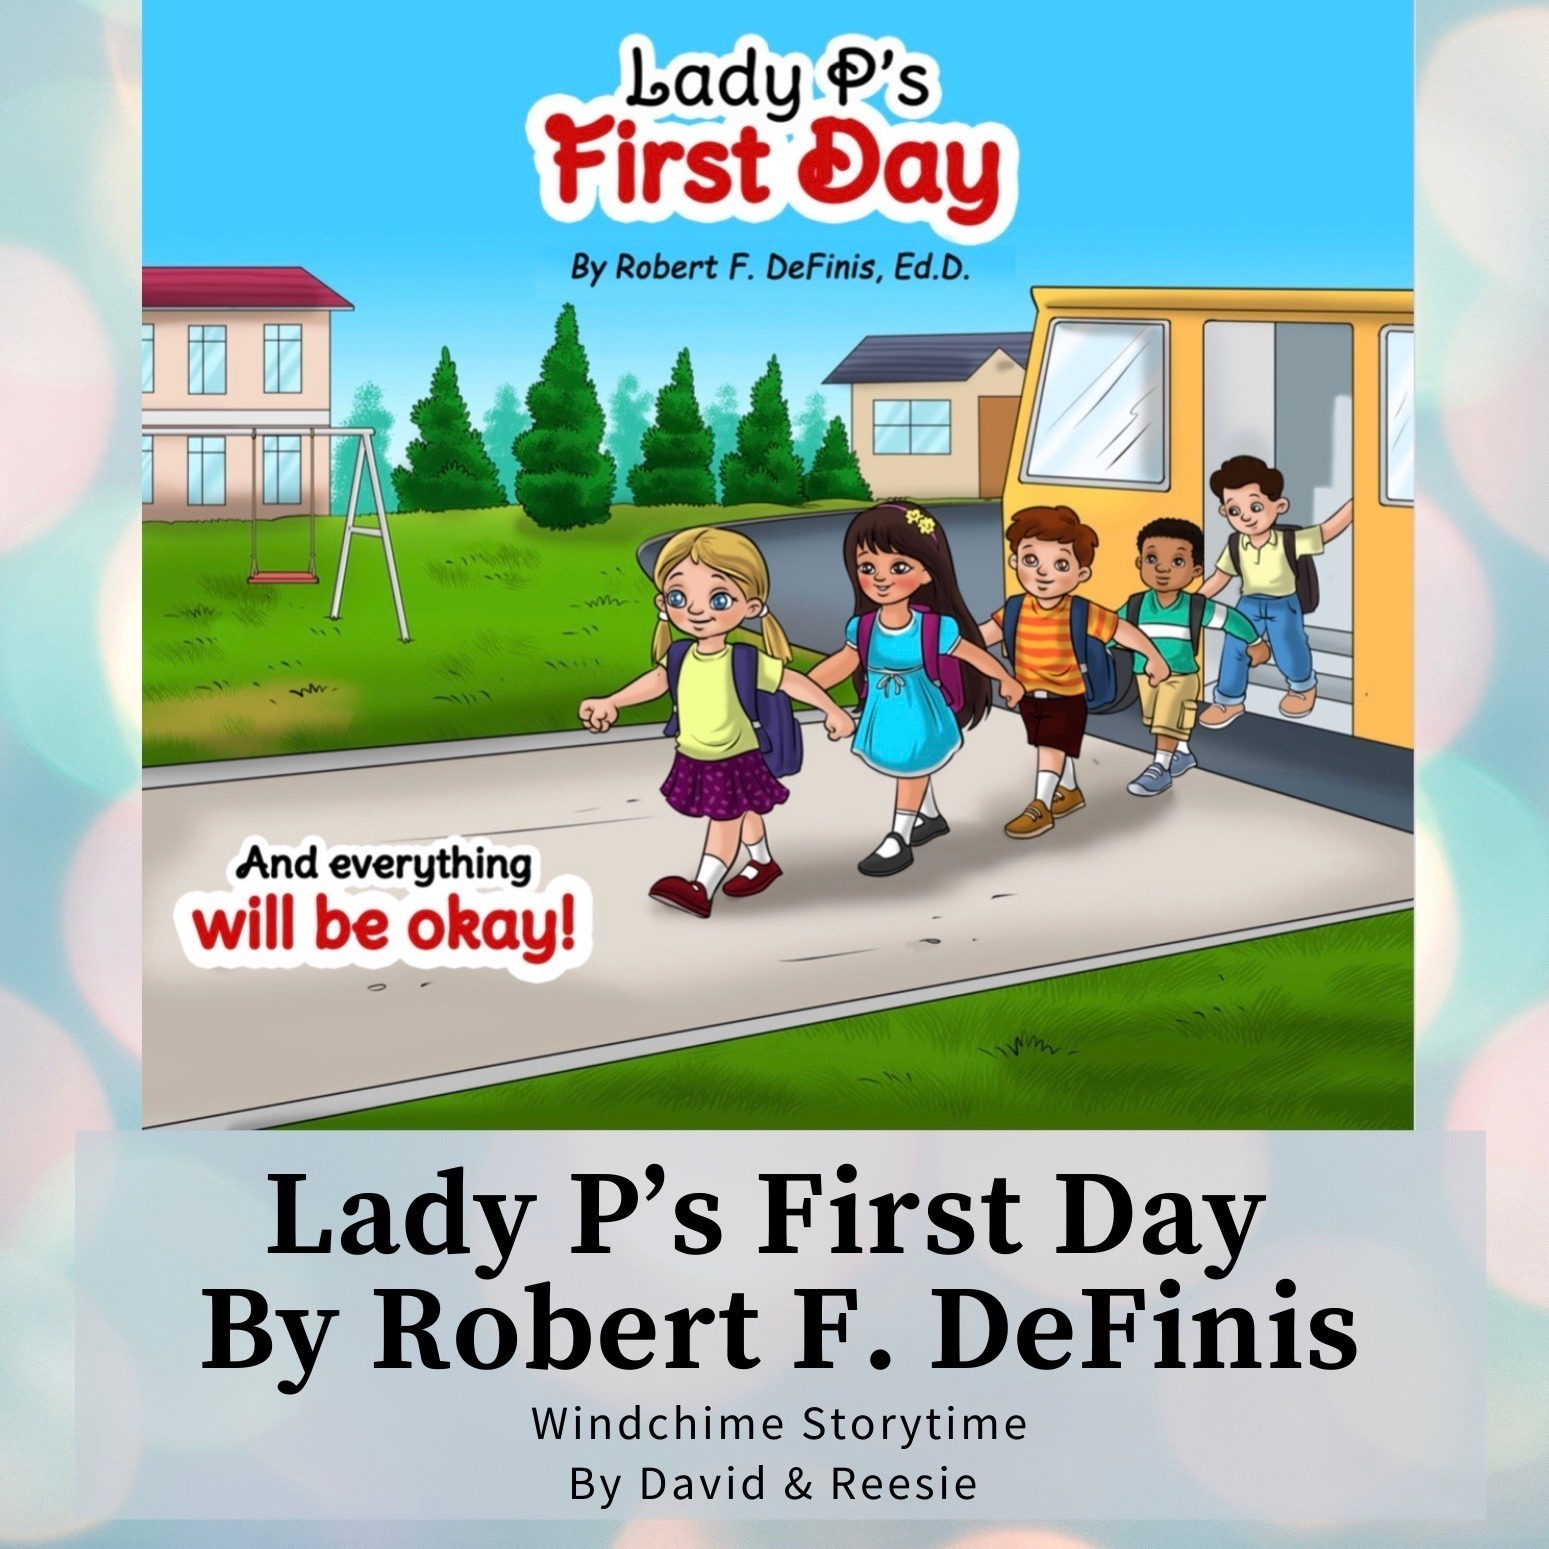 6- Lady P's First Day by Robert F DeFinis